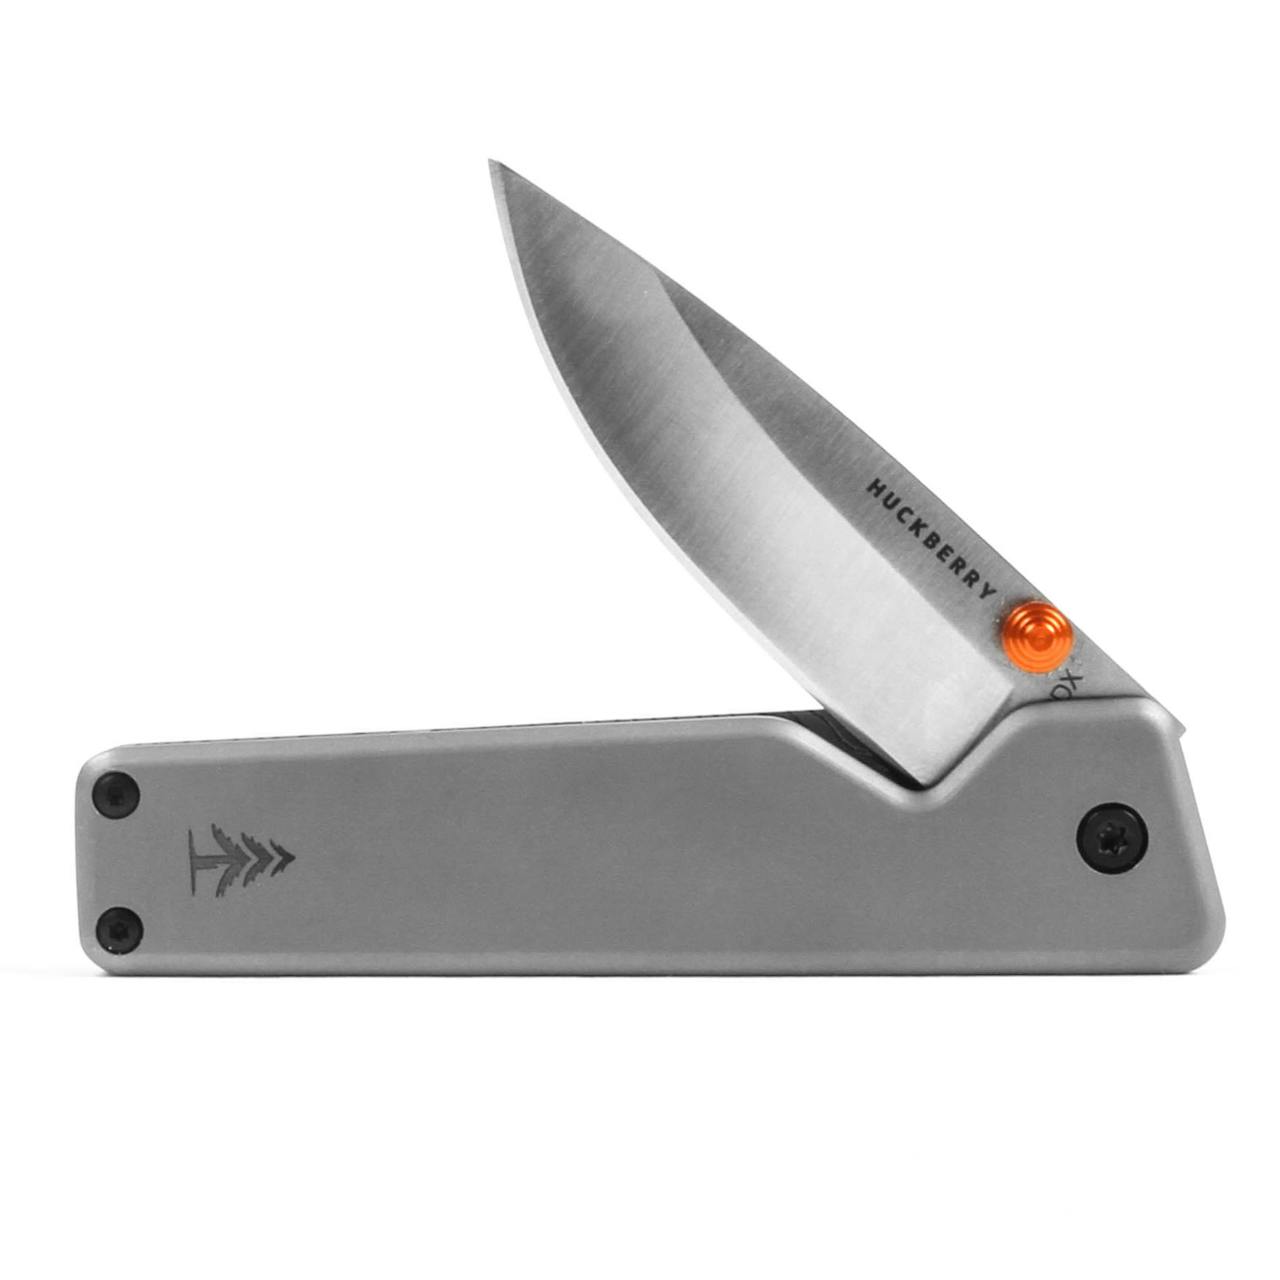 The James Brand Huckberry Chapter Knife